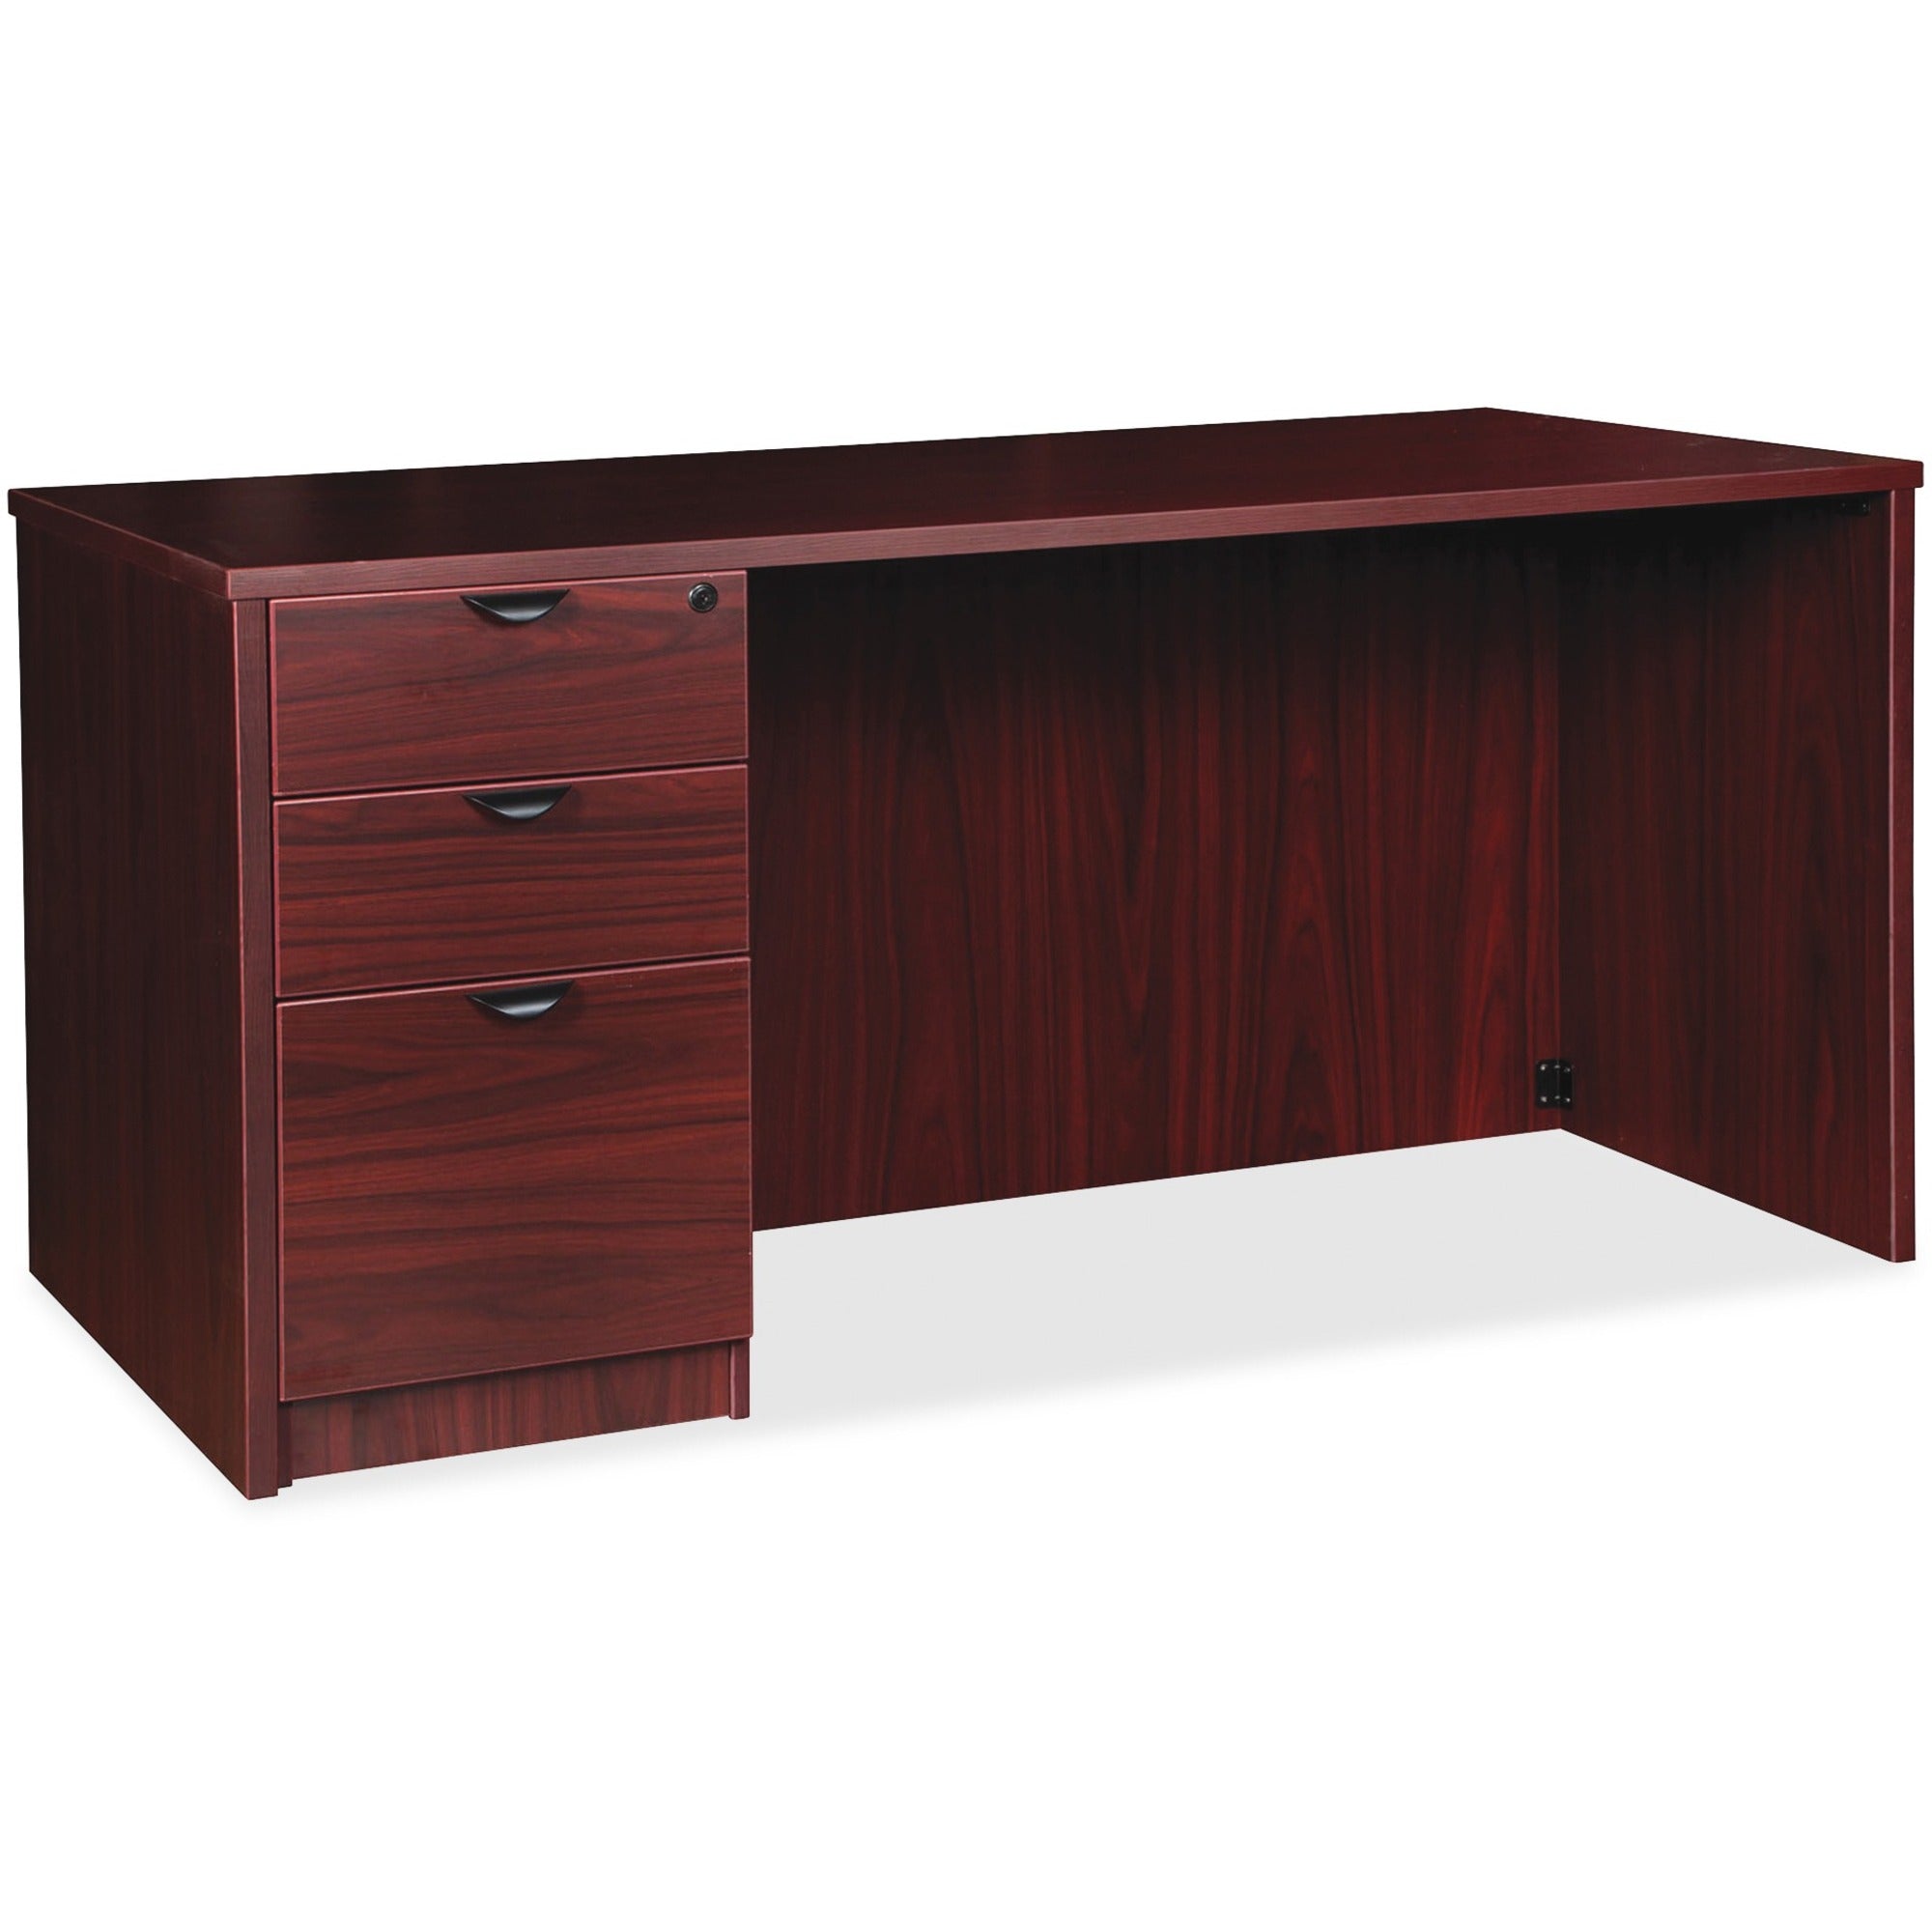 lorell-prominence-20-left-pedestal-desk-1-top-72-x-3629-3-x-file-box-drawers-single-pedestal-on-left-side-band-edge-material-particleboard-finish-mahogany-laminate-thermofused-melamine-tfm_llrpd3672lspmy - 1